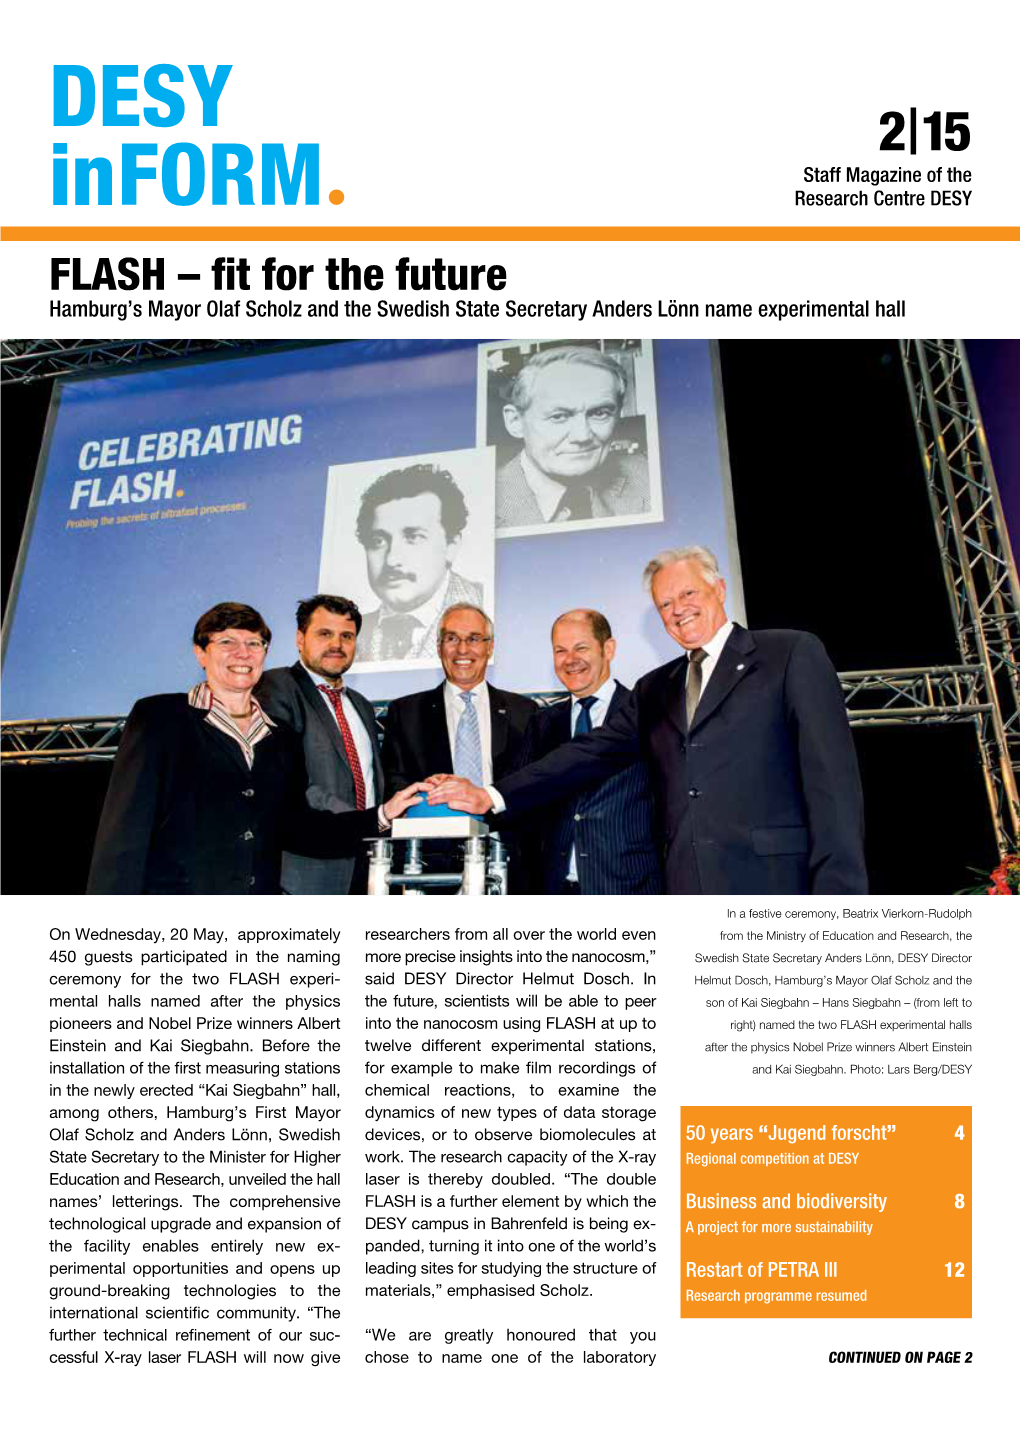 FLASH – Fit for the Future Hamburg’S Mayor Olaf Scholz and the Swedish State Secretary Anders Lönn Name Experimental Hall